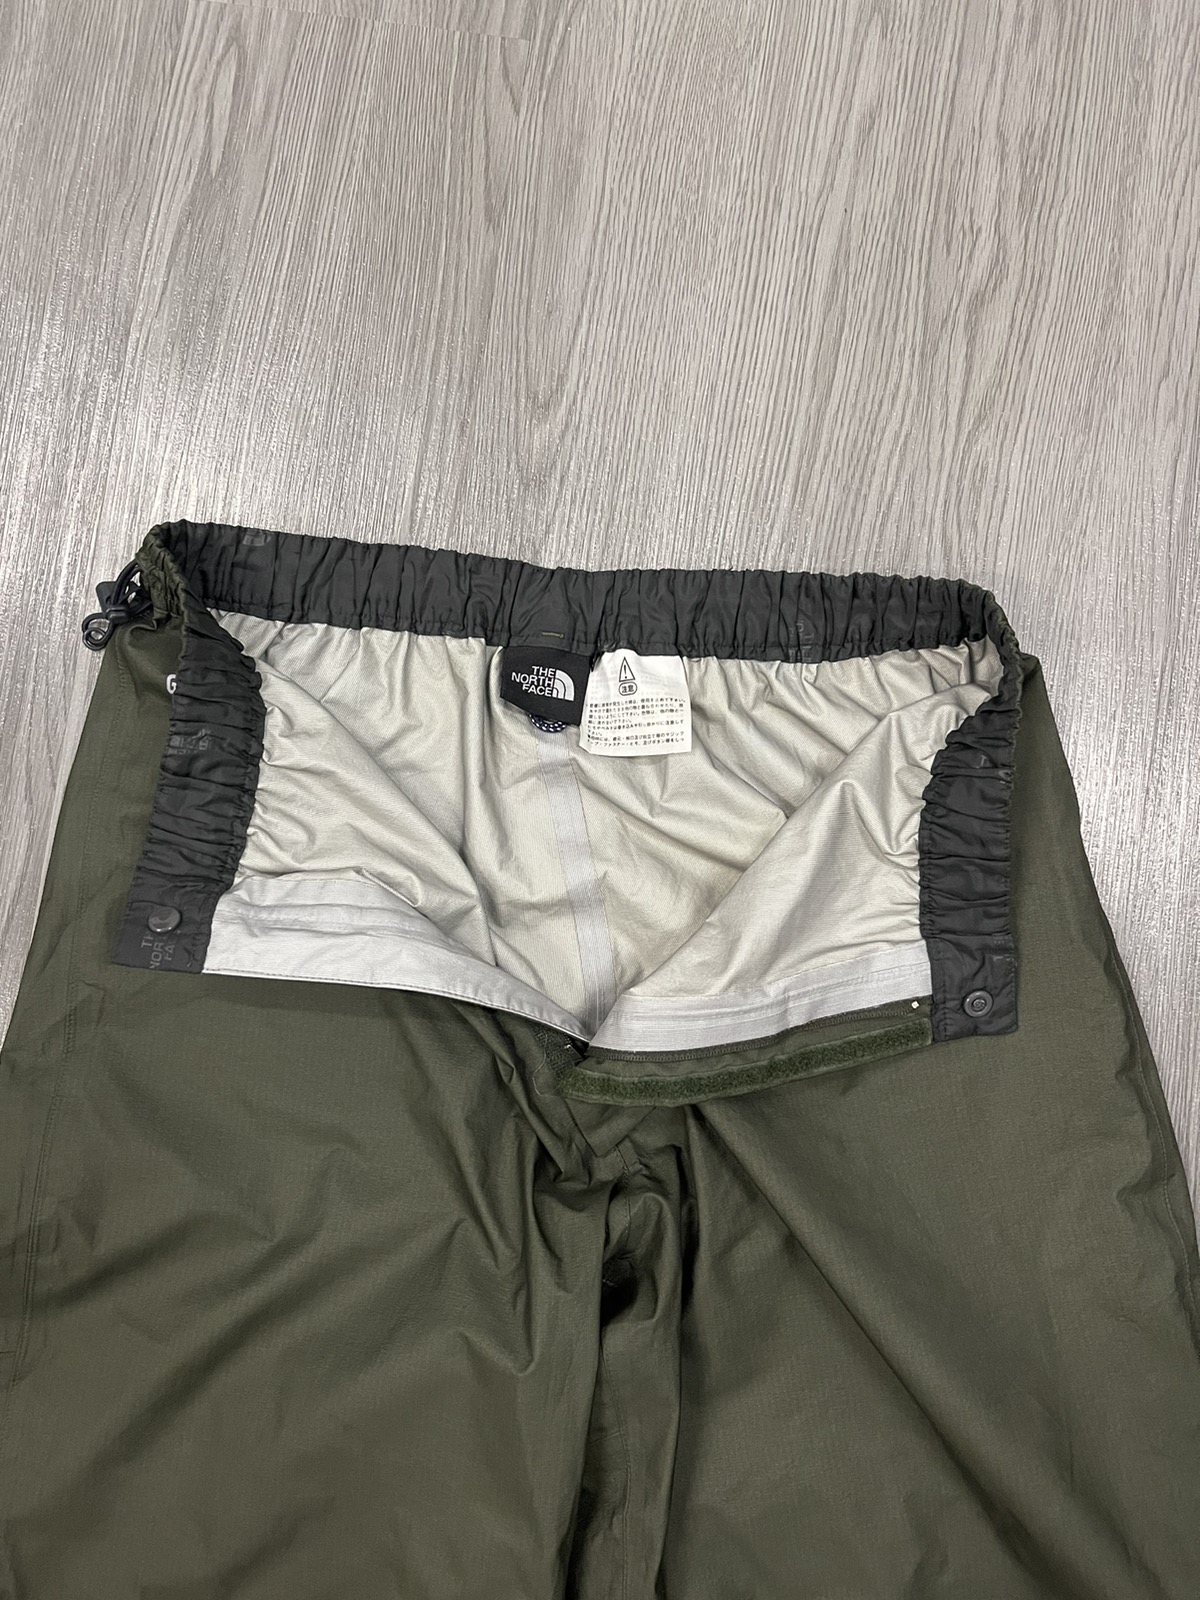 Gorpcore deal🔥The North Face Goretex pant in green - 5